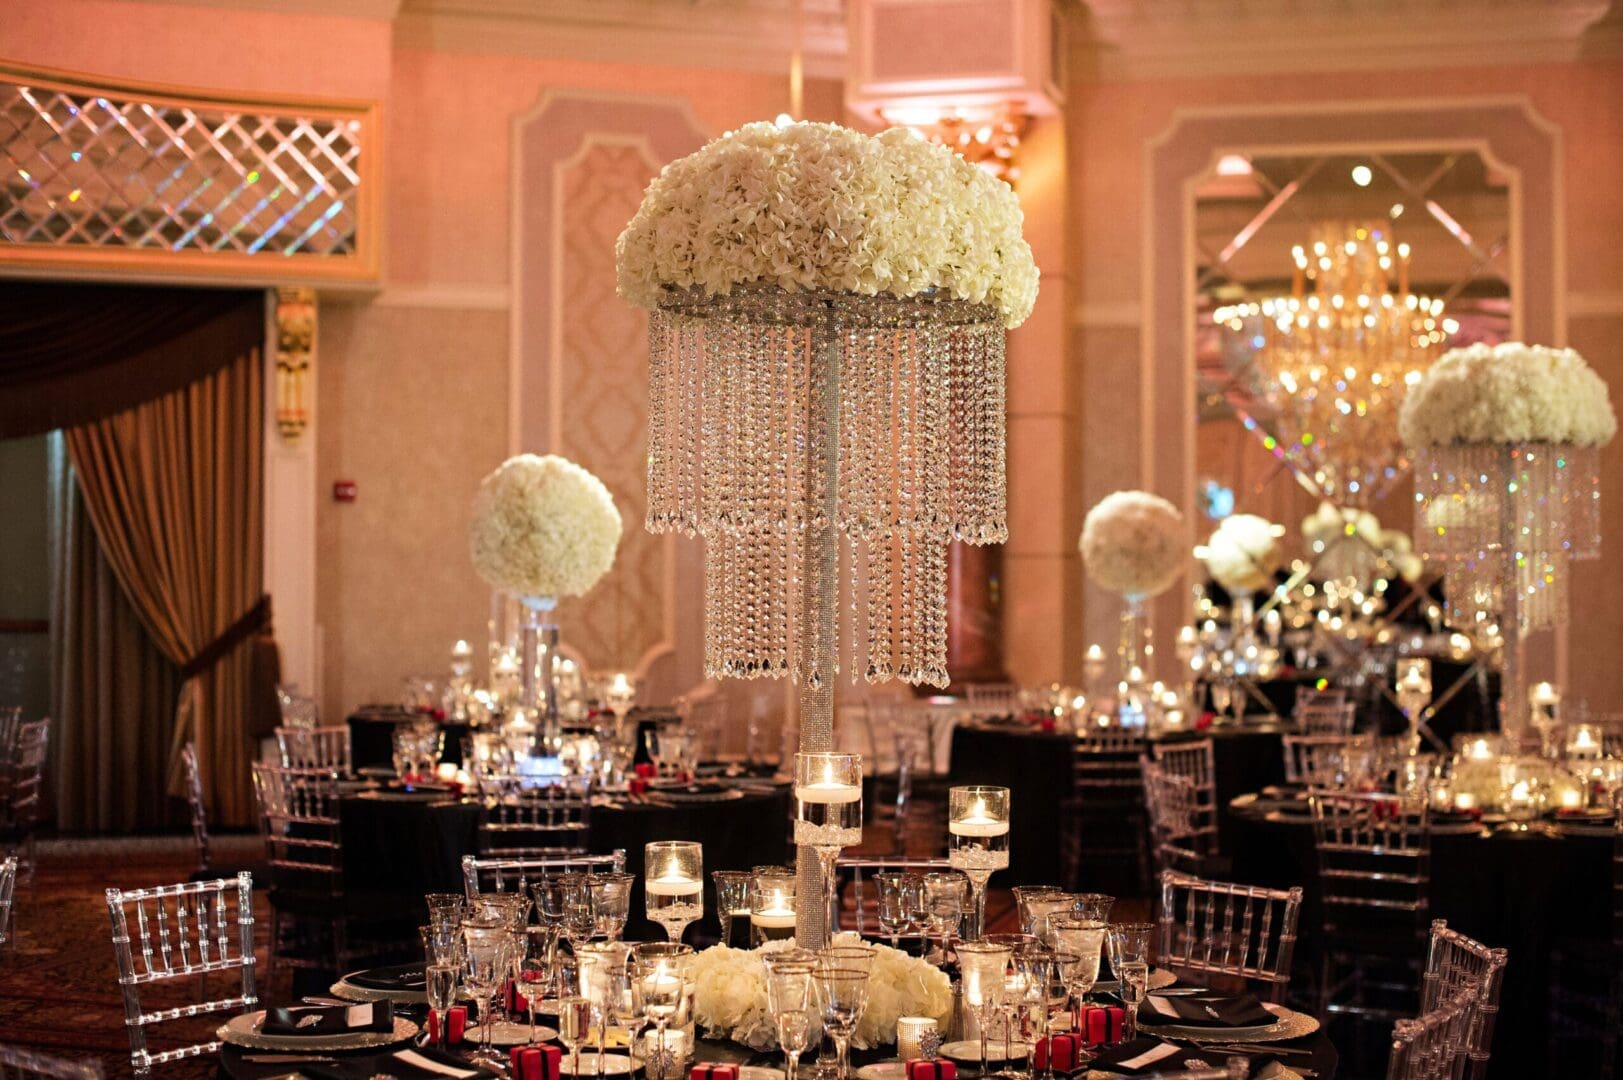 A black and white ballroom decorated with white flowers.